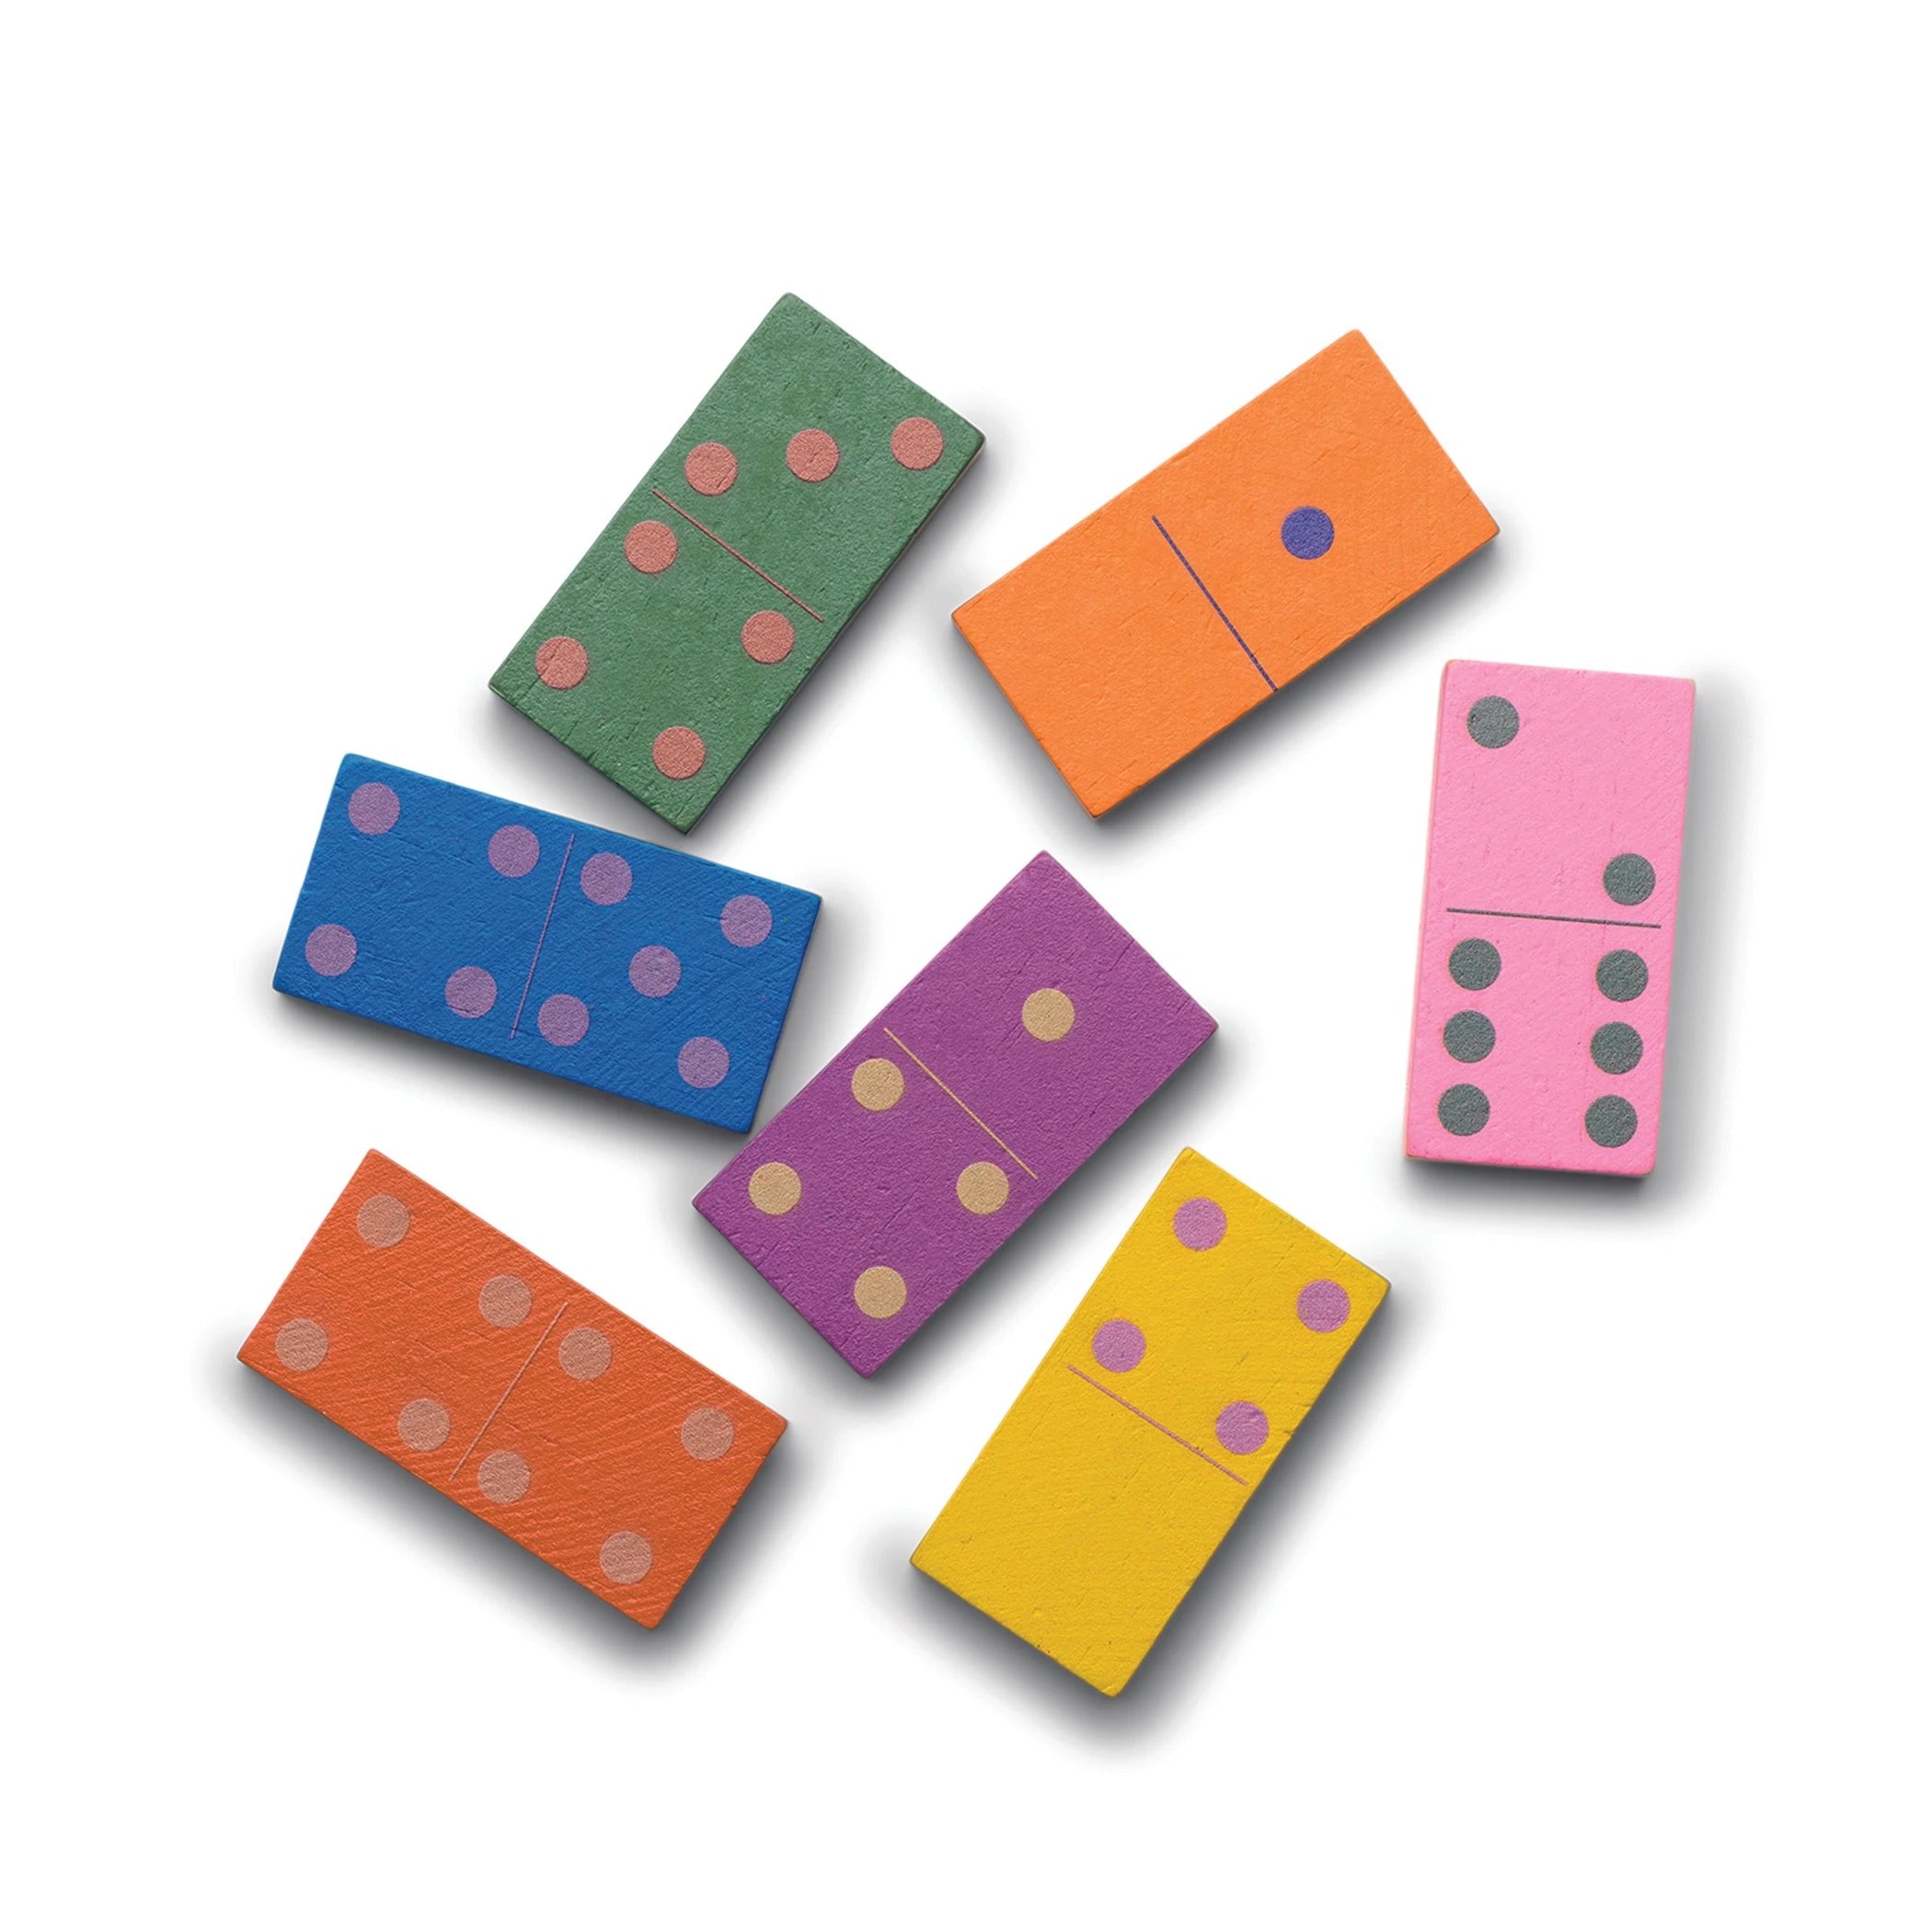 Library of Games Dominos - P I C N I C 